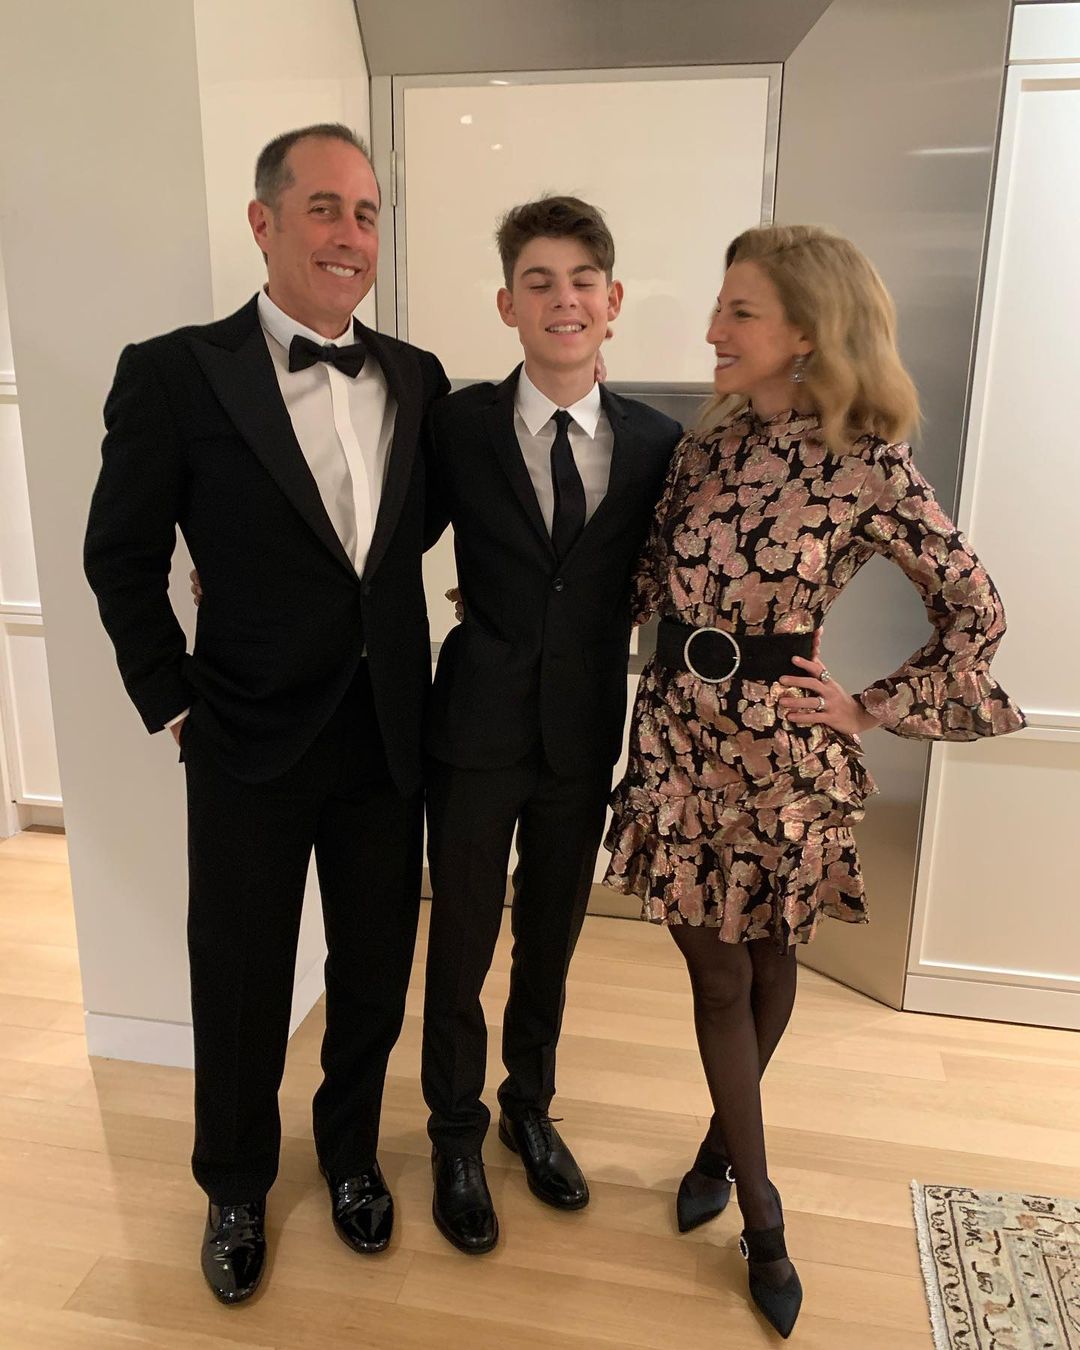 How Many Kids Does Jerry Seinfeld Have?